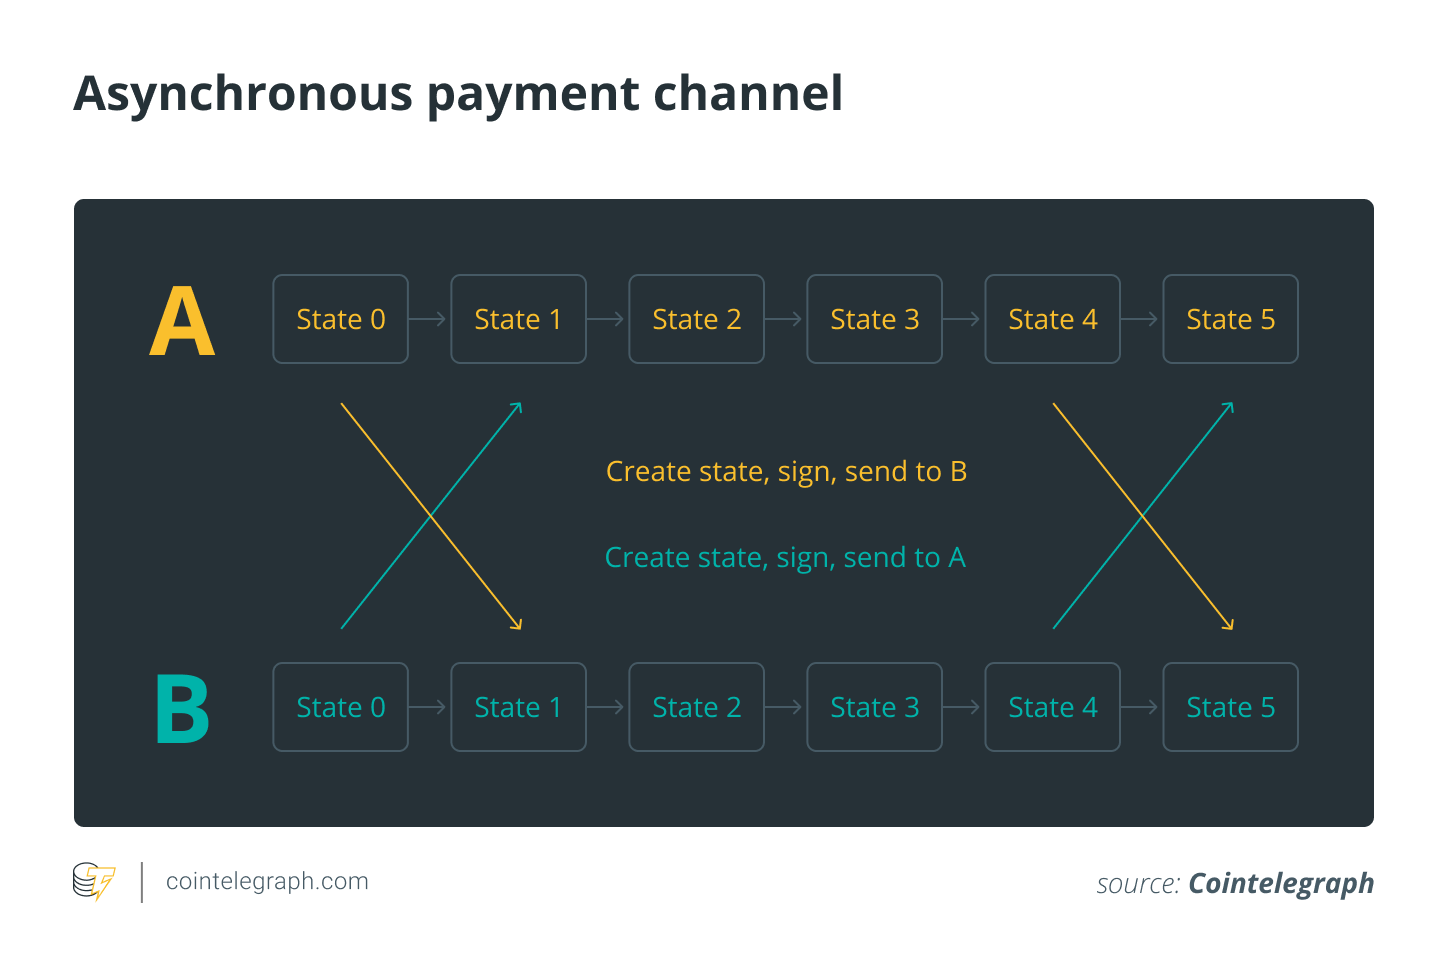 An off-chain transaction from Party A to Party B through an asynchronous payment channel